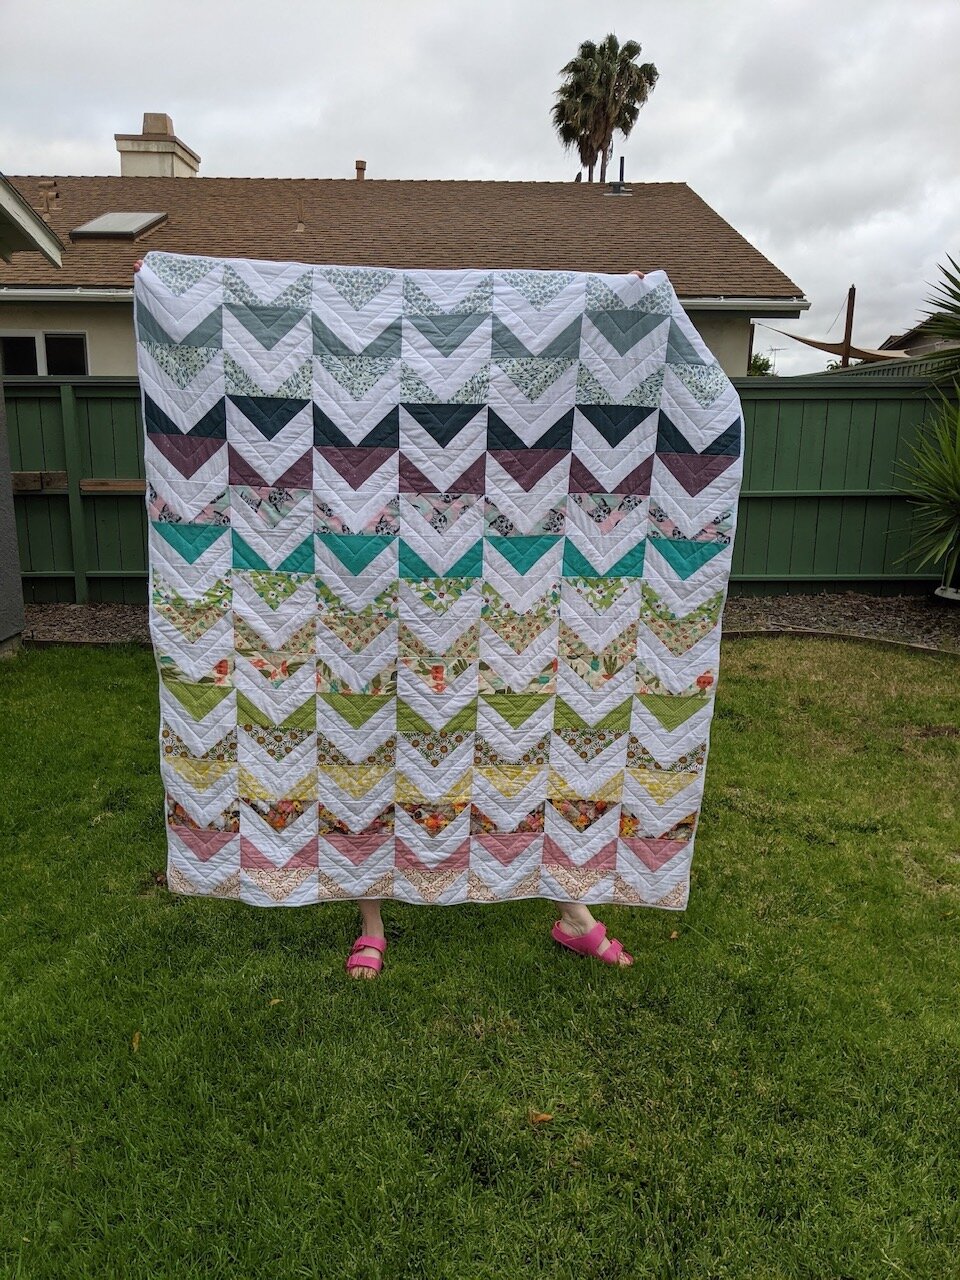 Paige used a solid white background for her quilt, which really makes the colors and prints pop! I love the chevron quilting design she added to echo the shapes of the pattern. And this is such a beautiful spring photo! (Paige has a private IG page.)